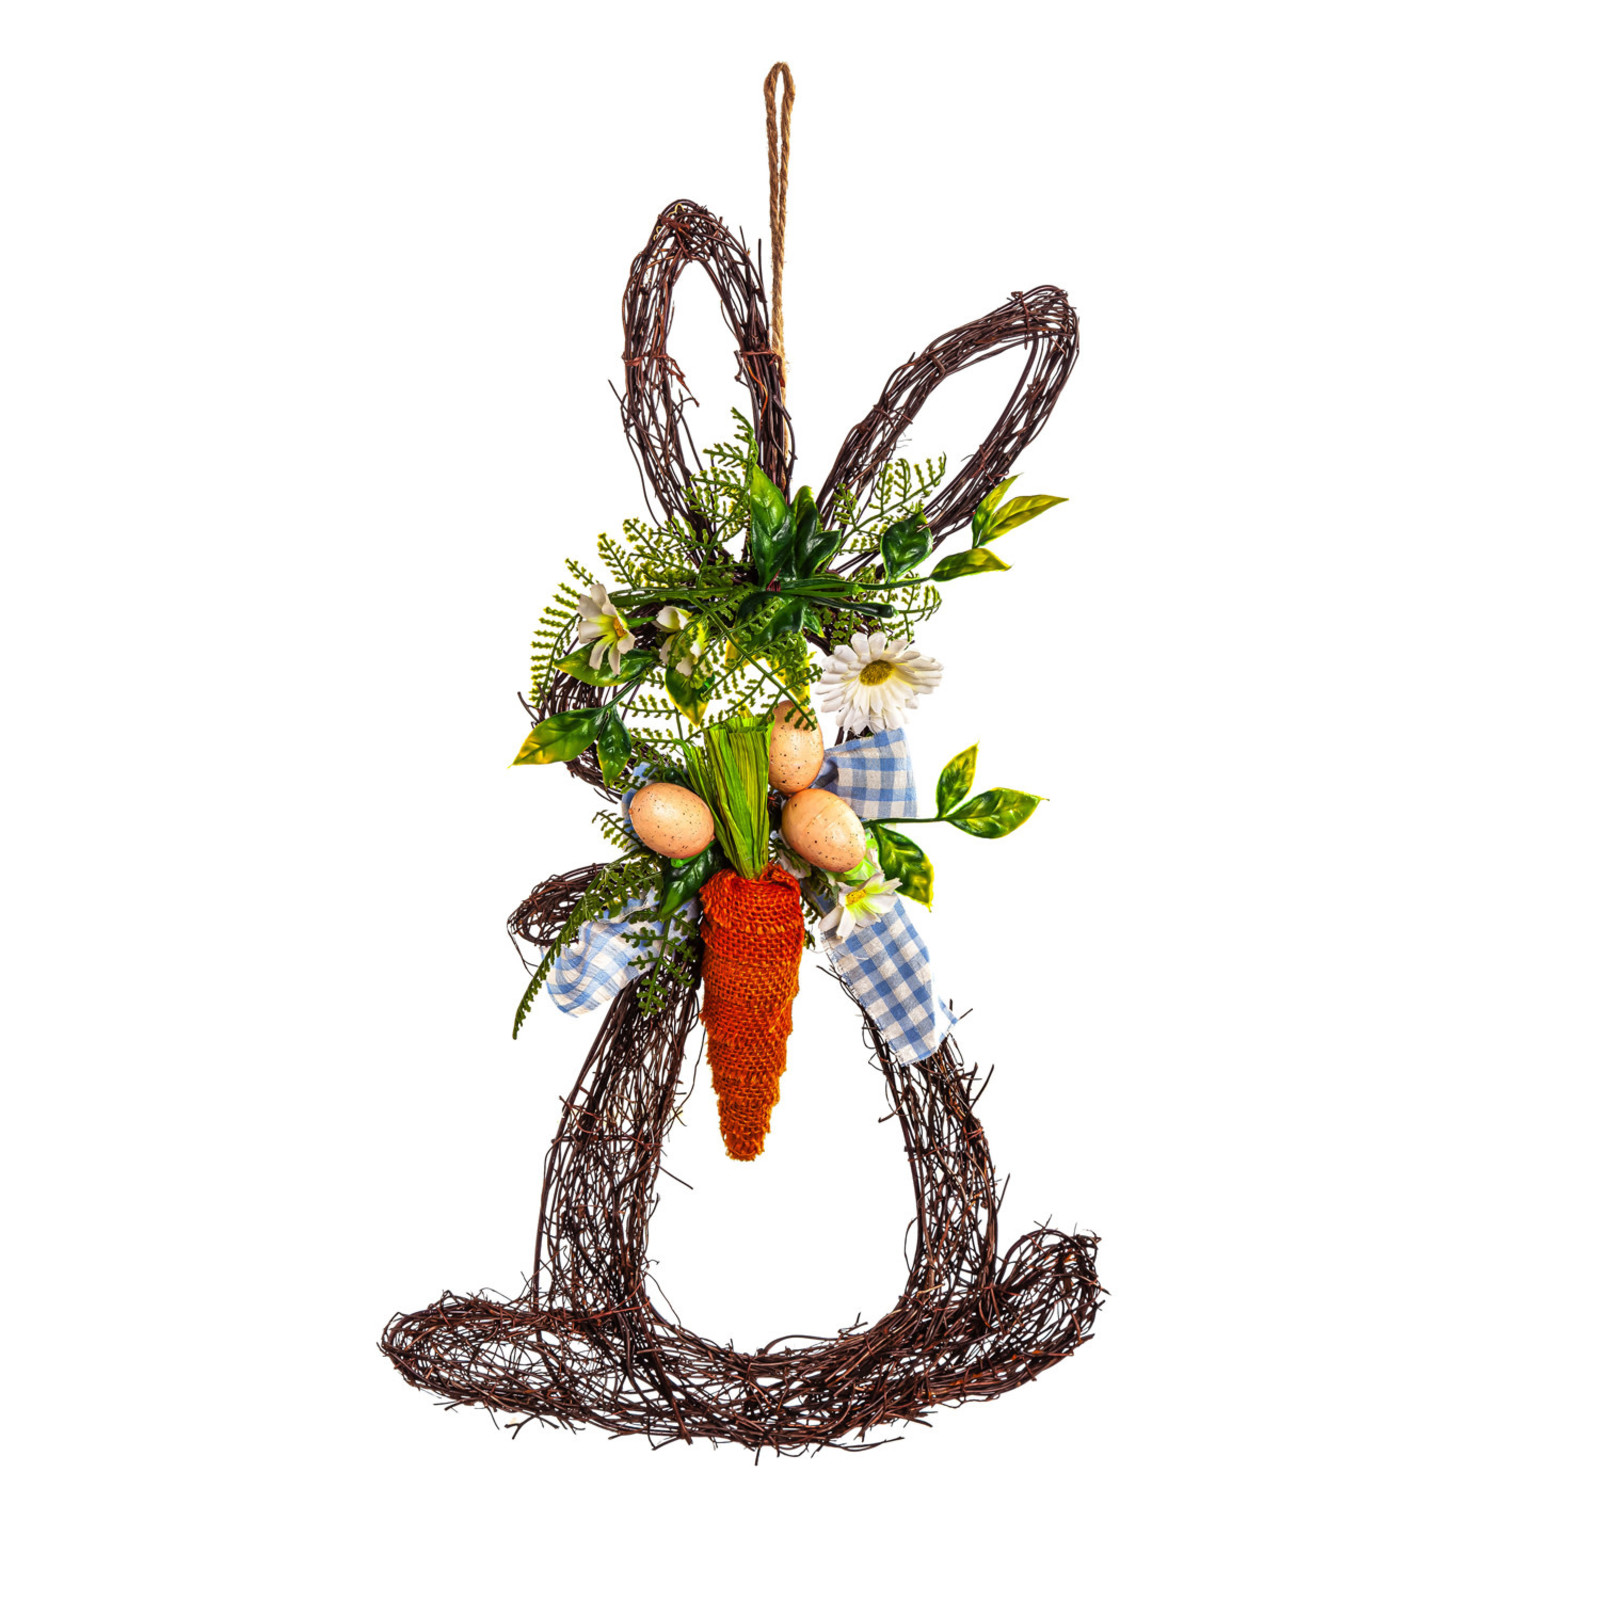 Evergreen Enterprises 18" Rattan Bunny with Plaid Bow and Carrot   4FL170 loading=